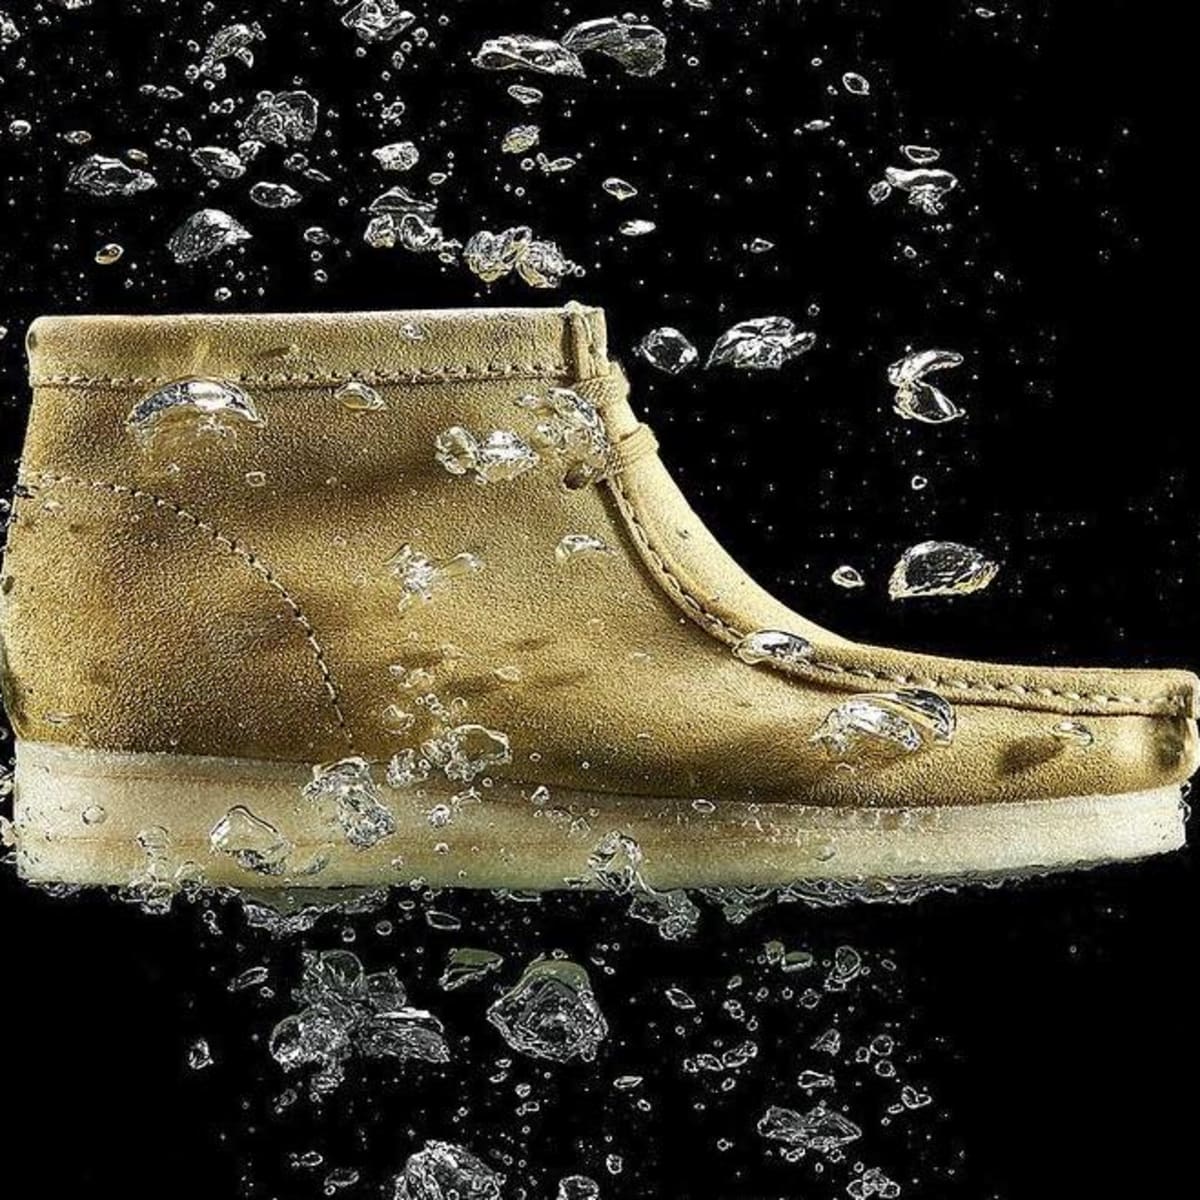 clarks water resistant boots